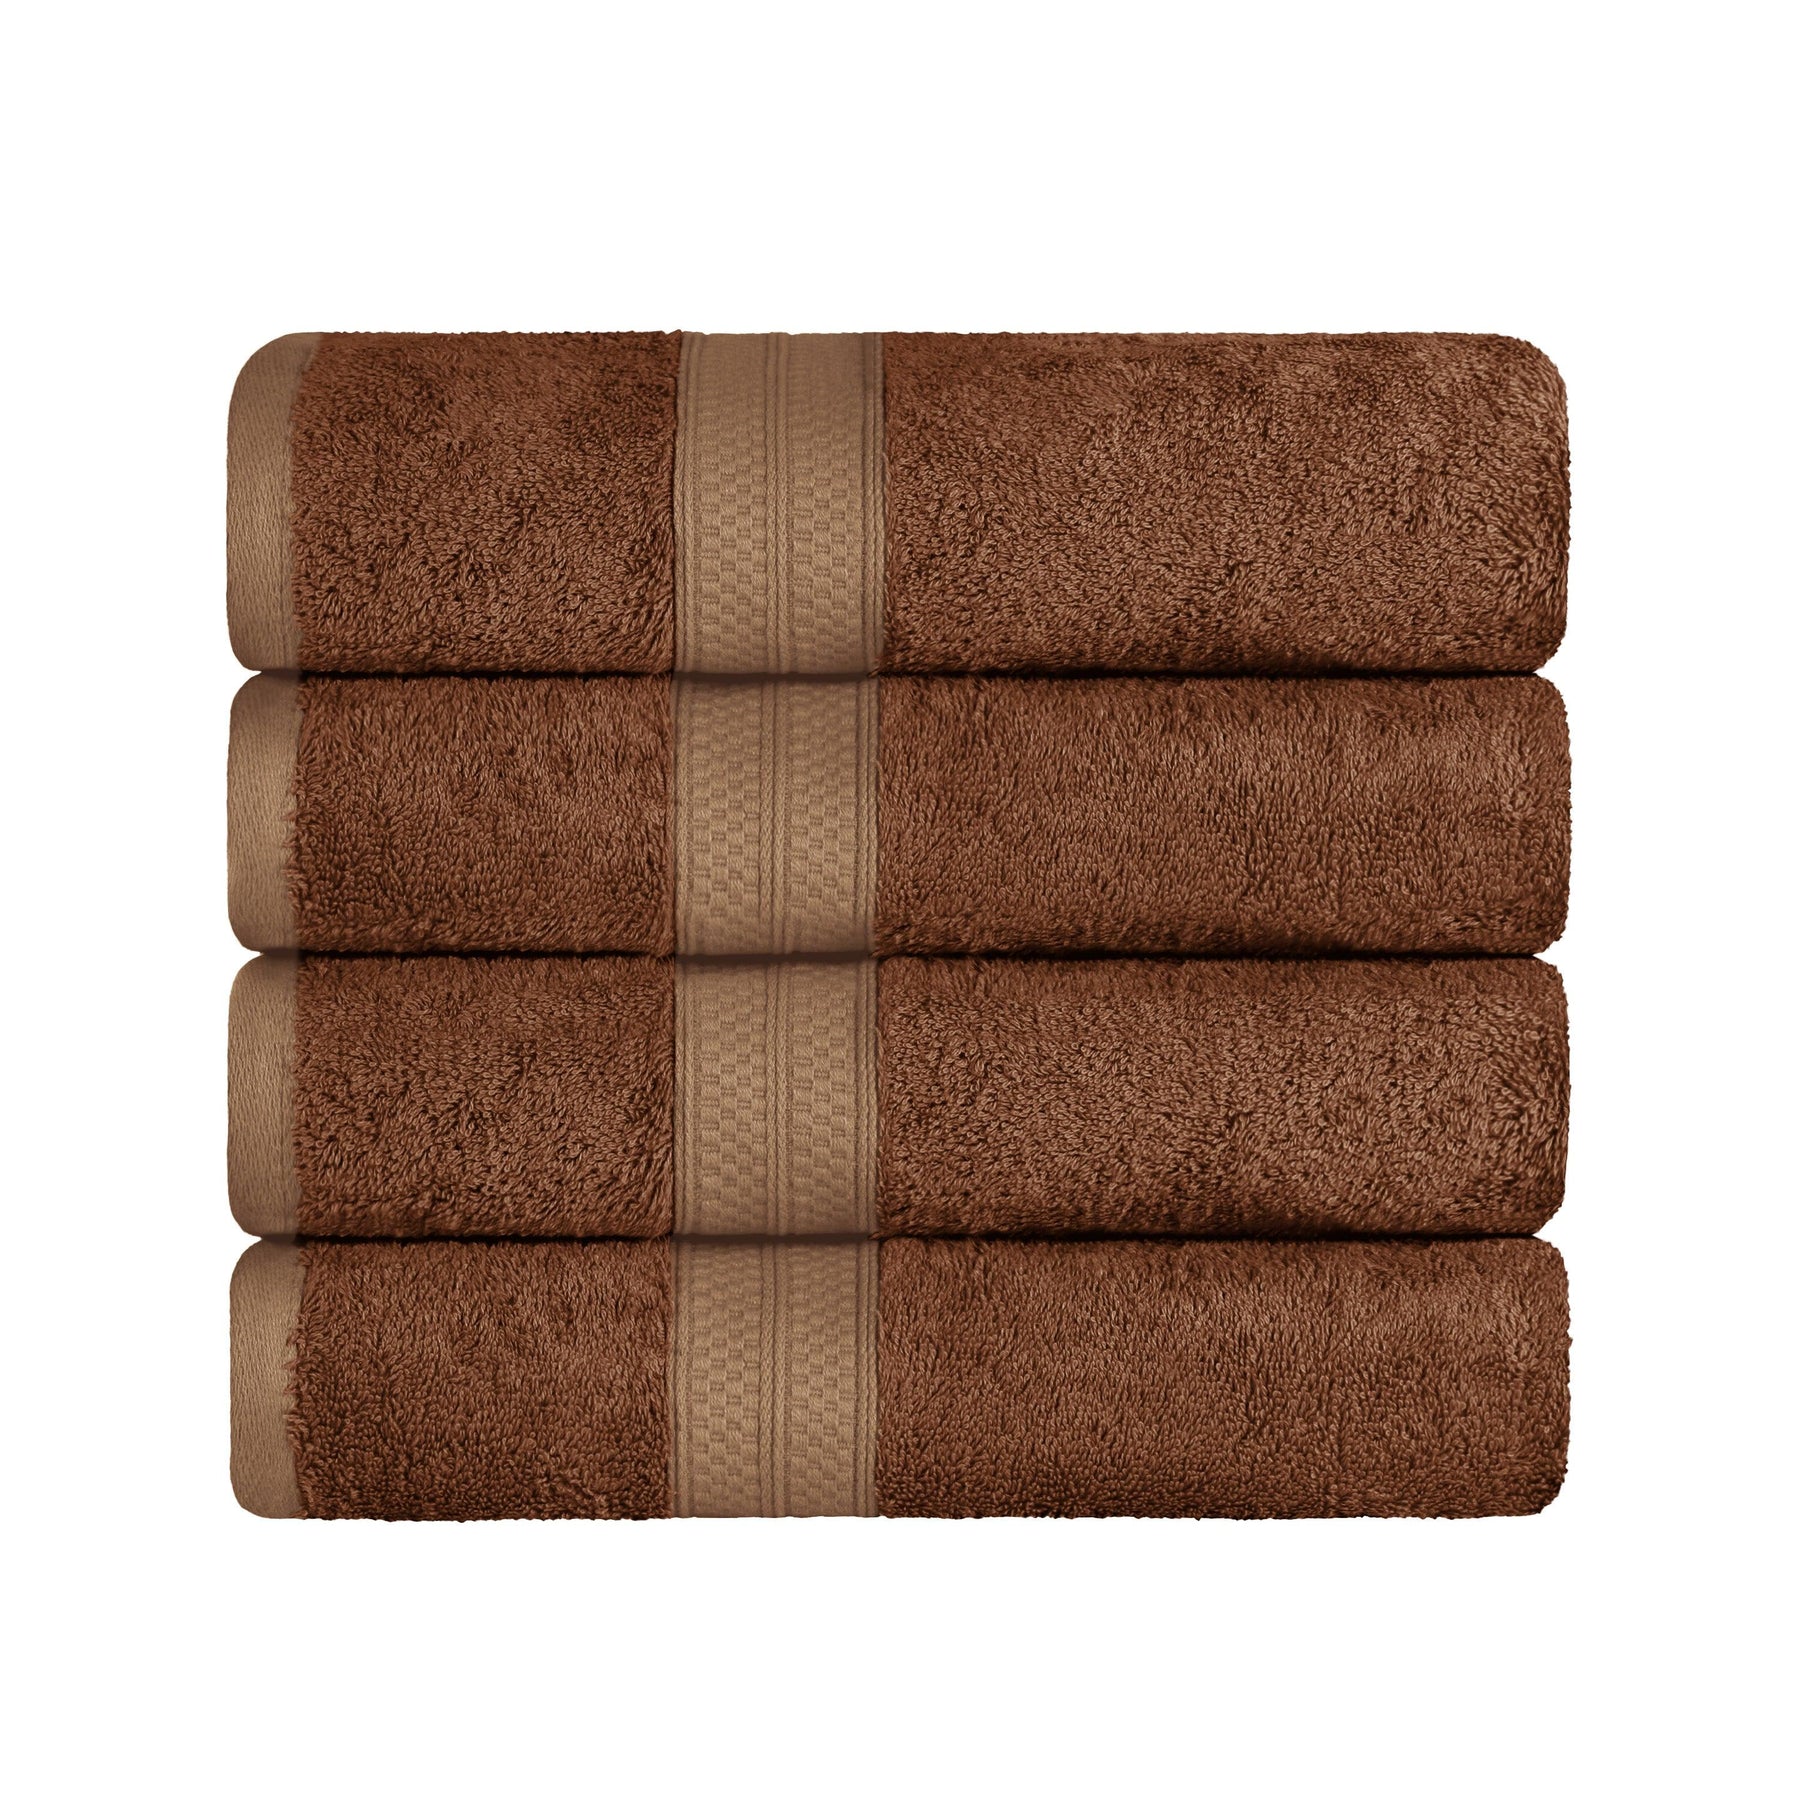  Ultra-Soft Hypoallergenic Rayon from Bamboo Cotton Blend Assorted Bath Towel Set - Cocoa